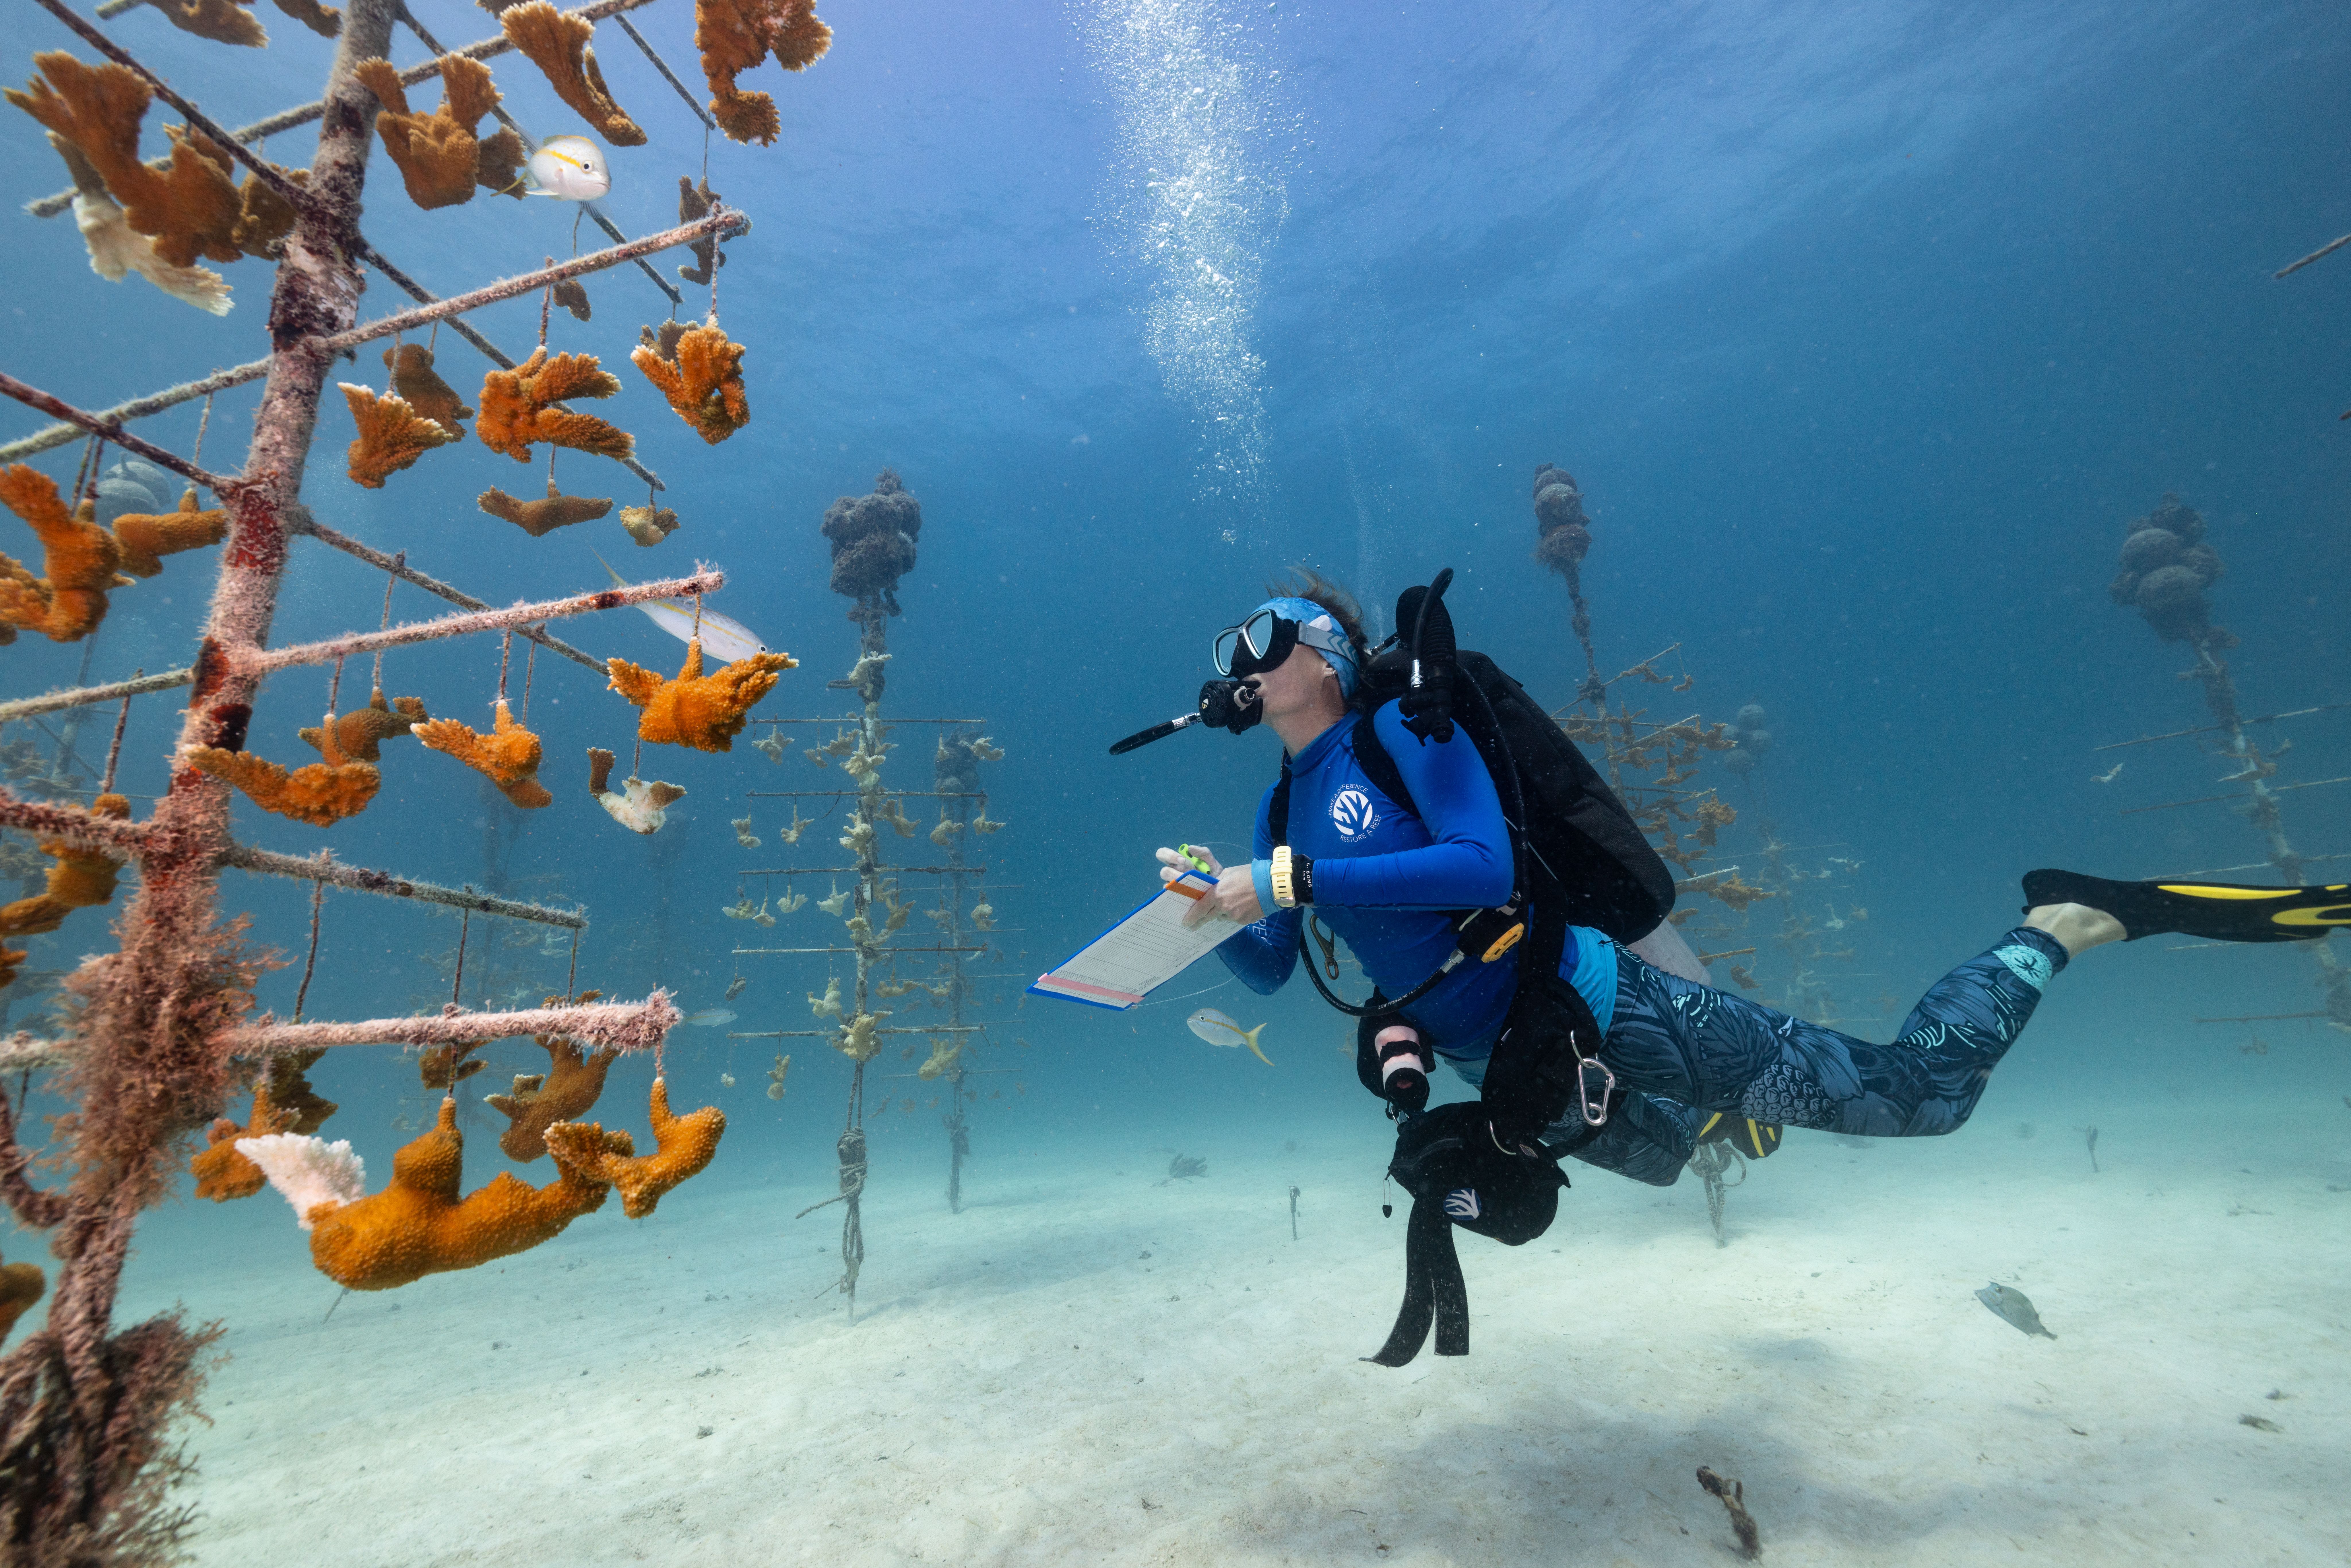 Jennifer Adler was recognized for her “Corals of the Future” series, which aims to make ocean science more accessible. Here, scientist Roxane Boonstra examines a “tree” of healthy elkhorn coral at the Coral Restoration Foundation’s Tavernier nursery, Florida, the world’s largest underwater coral nursery.